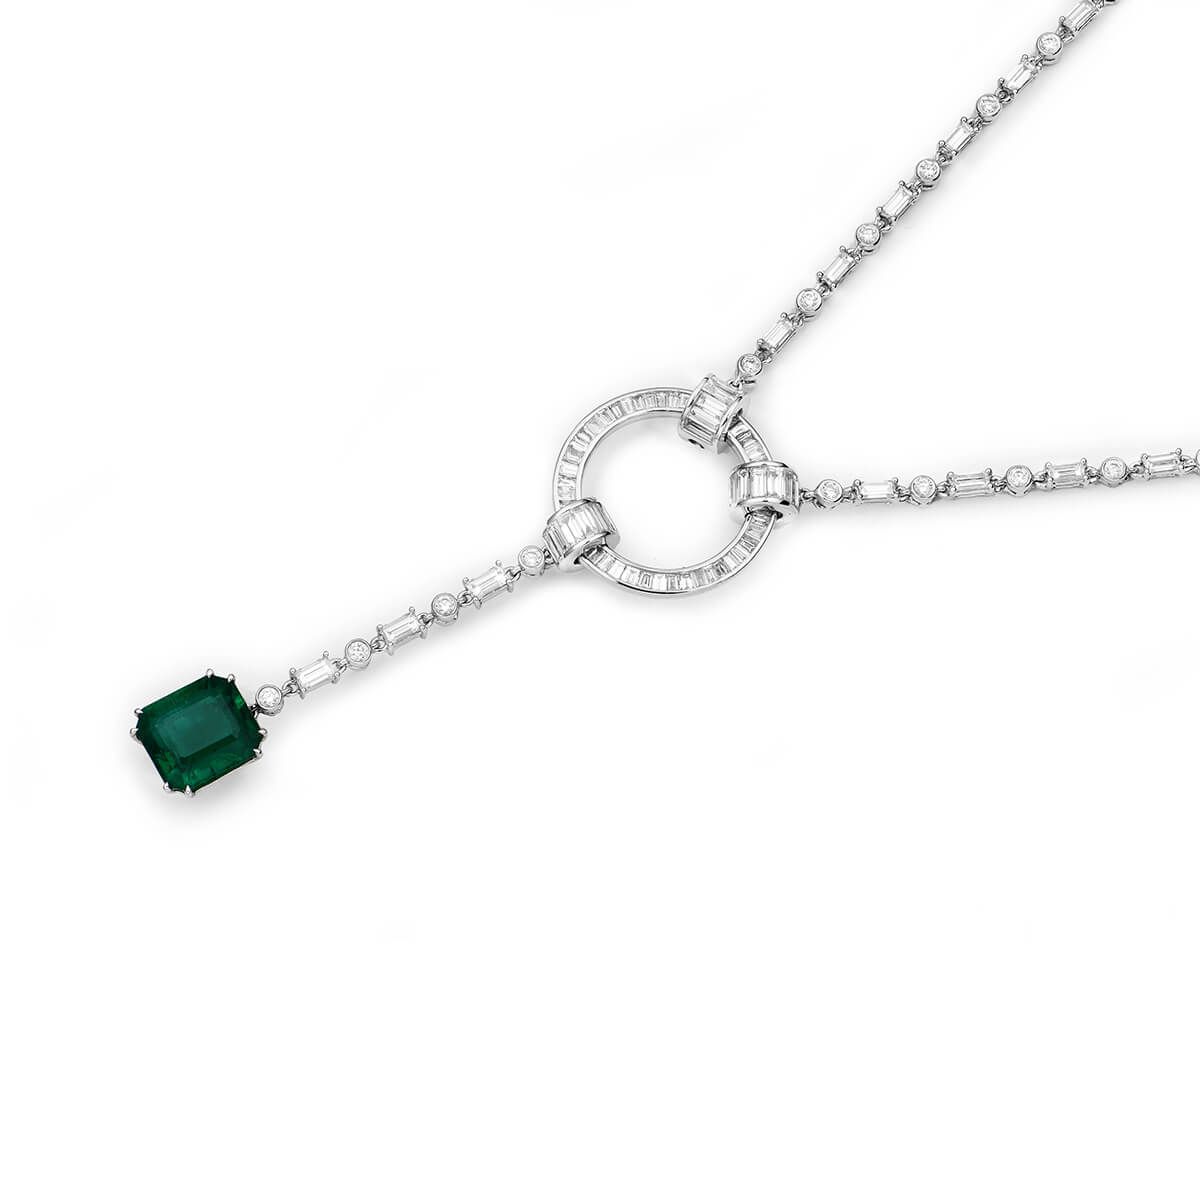 Natural Vivid Green Emerald Necklace, 8.52 Ct. TW, GRS Certified, GRS2018-078134, Unheated